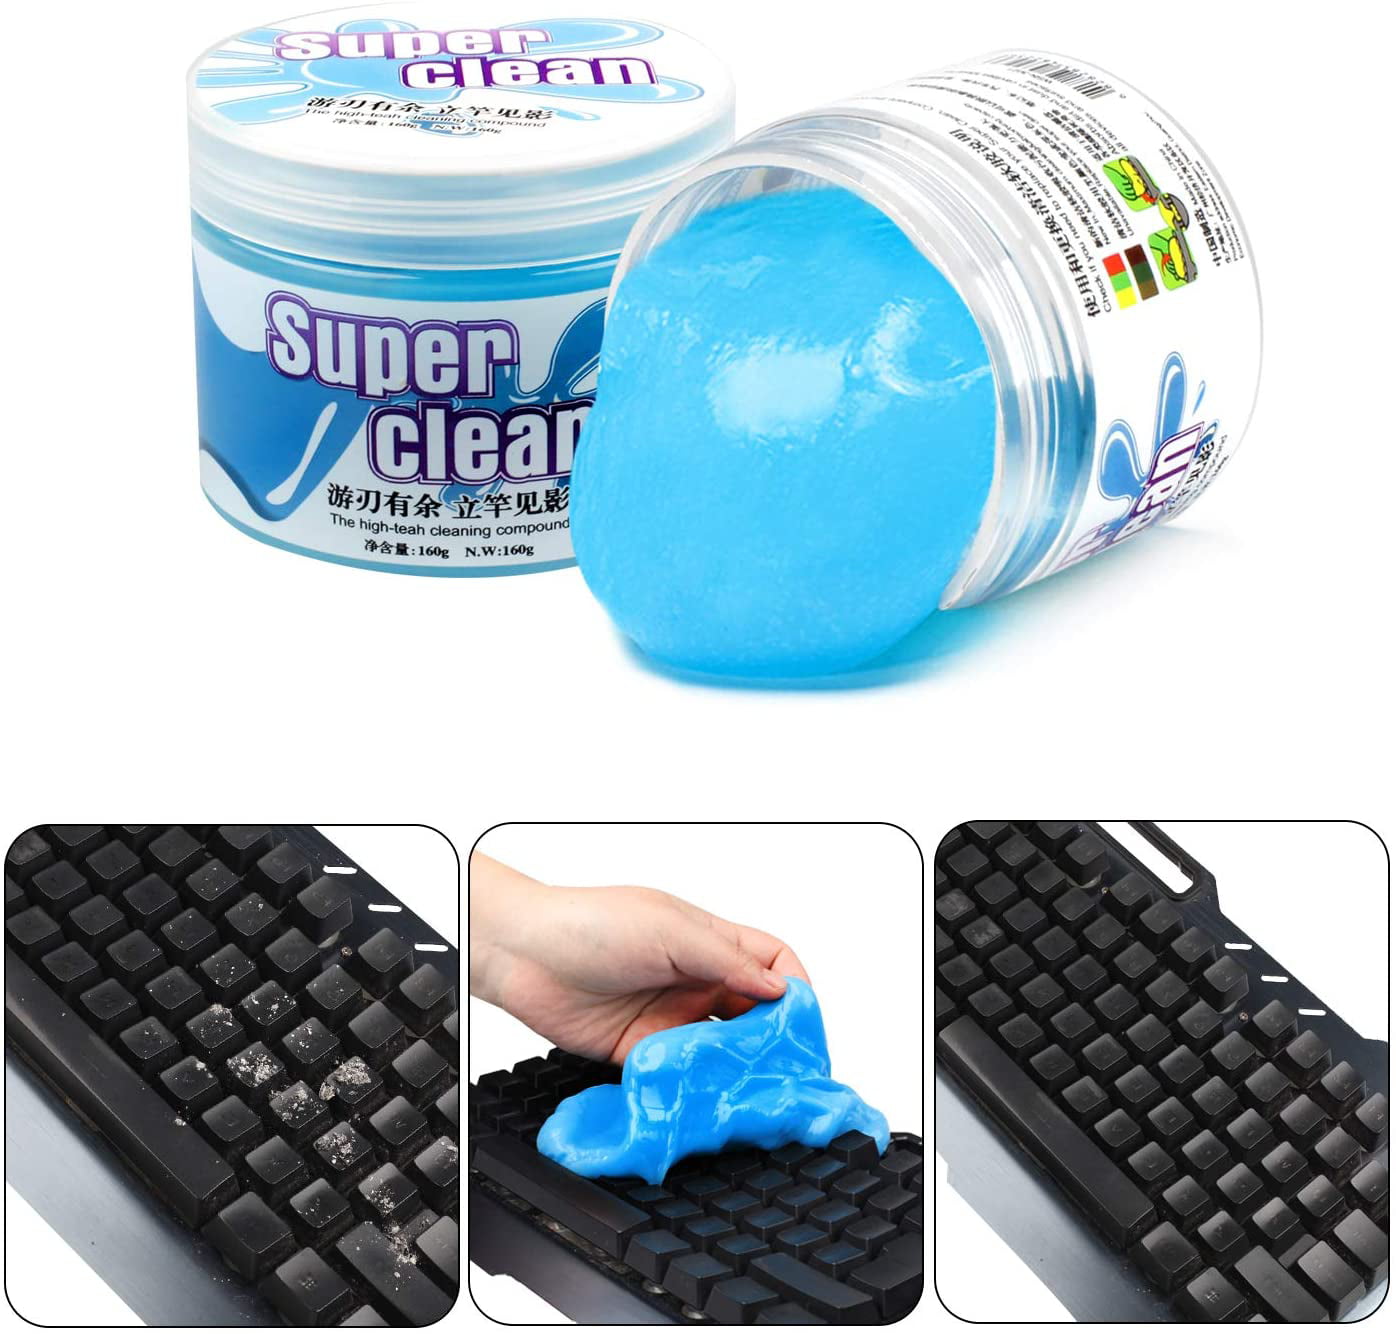 Car Air Vent Magic Dust Cleaner Gel Household Auto Laptop Keyboard Cleaning  Gel Office Gap Wash Mud Removal Slime Rubber - Car Wash Mud - AliExpress